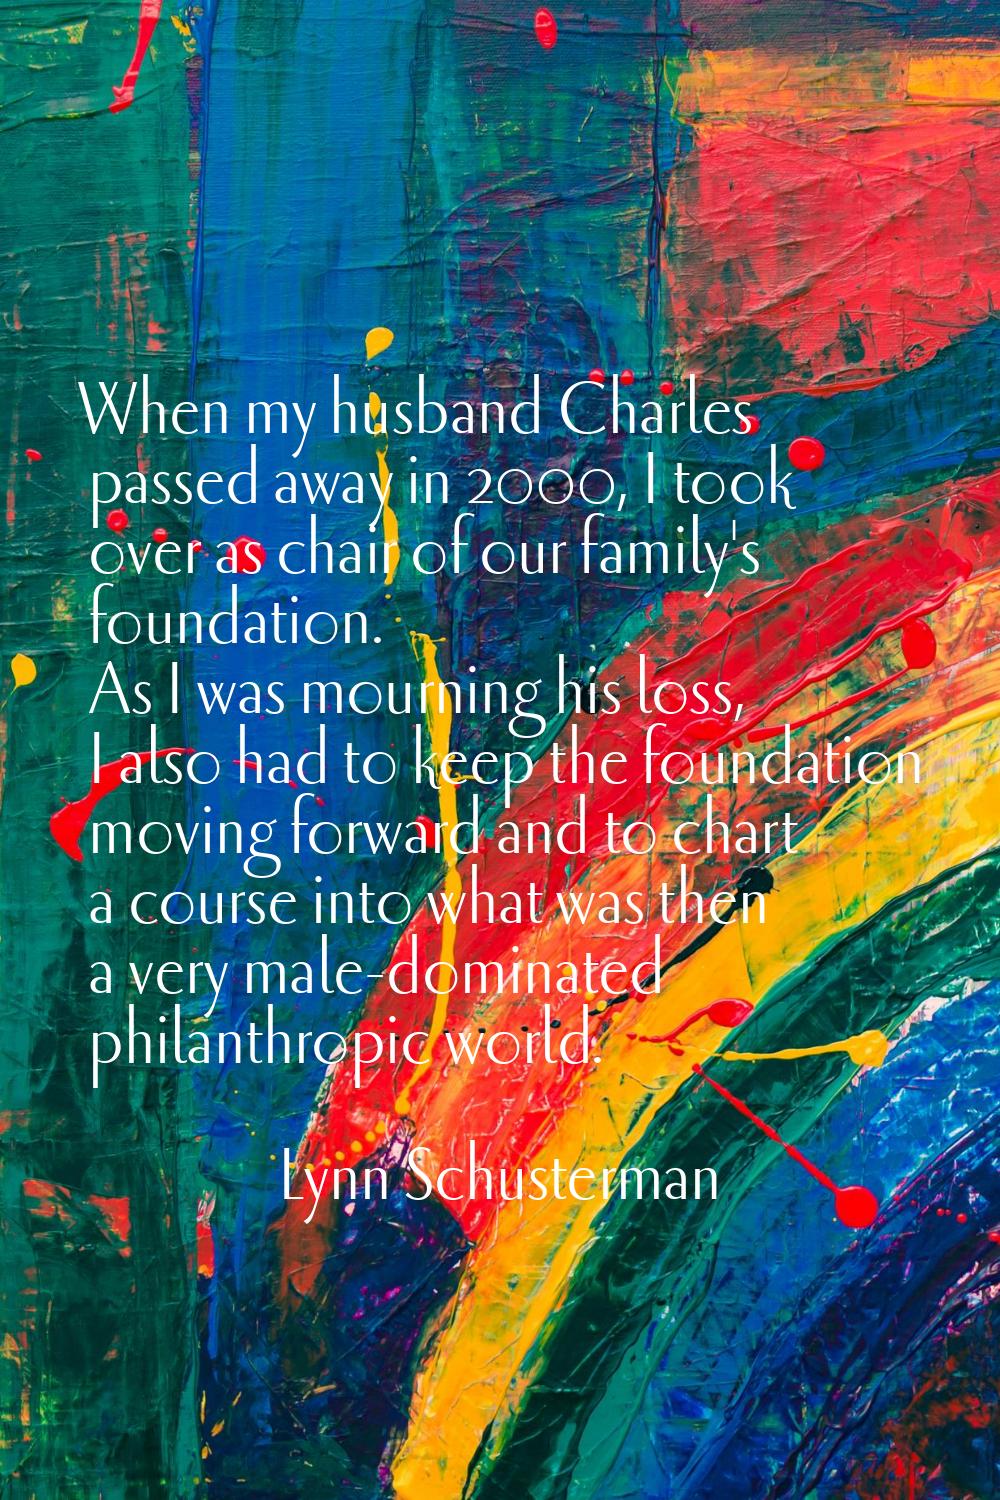 When my husband Charles passed away in 2000, I took over as chair of our family's foundation. As I 